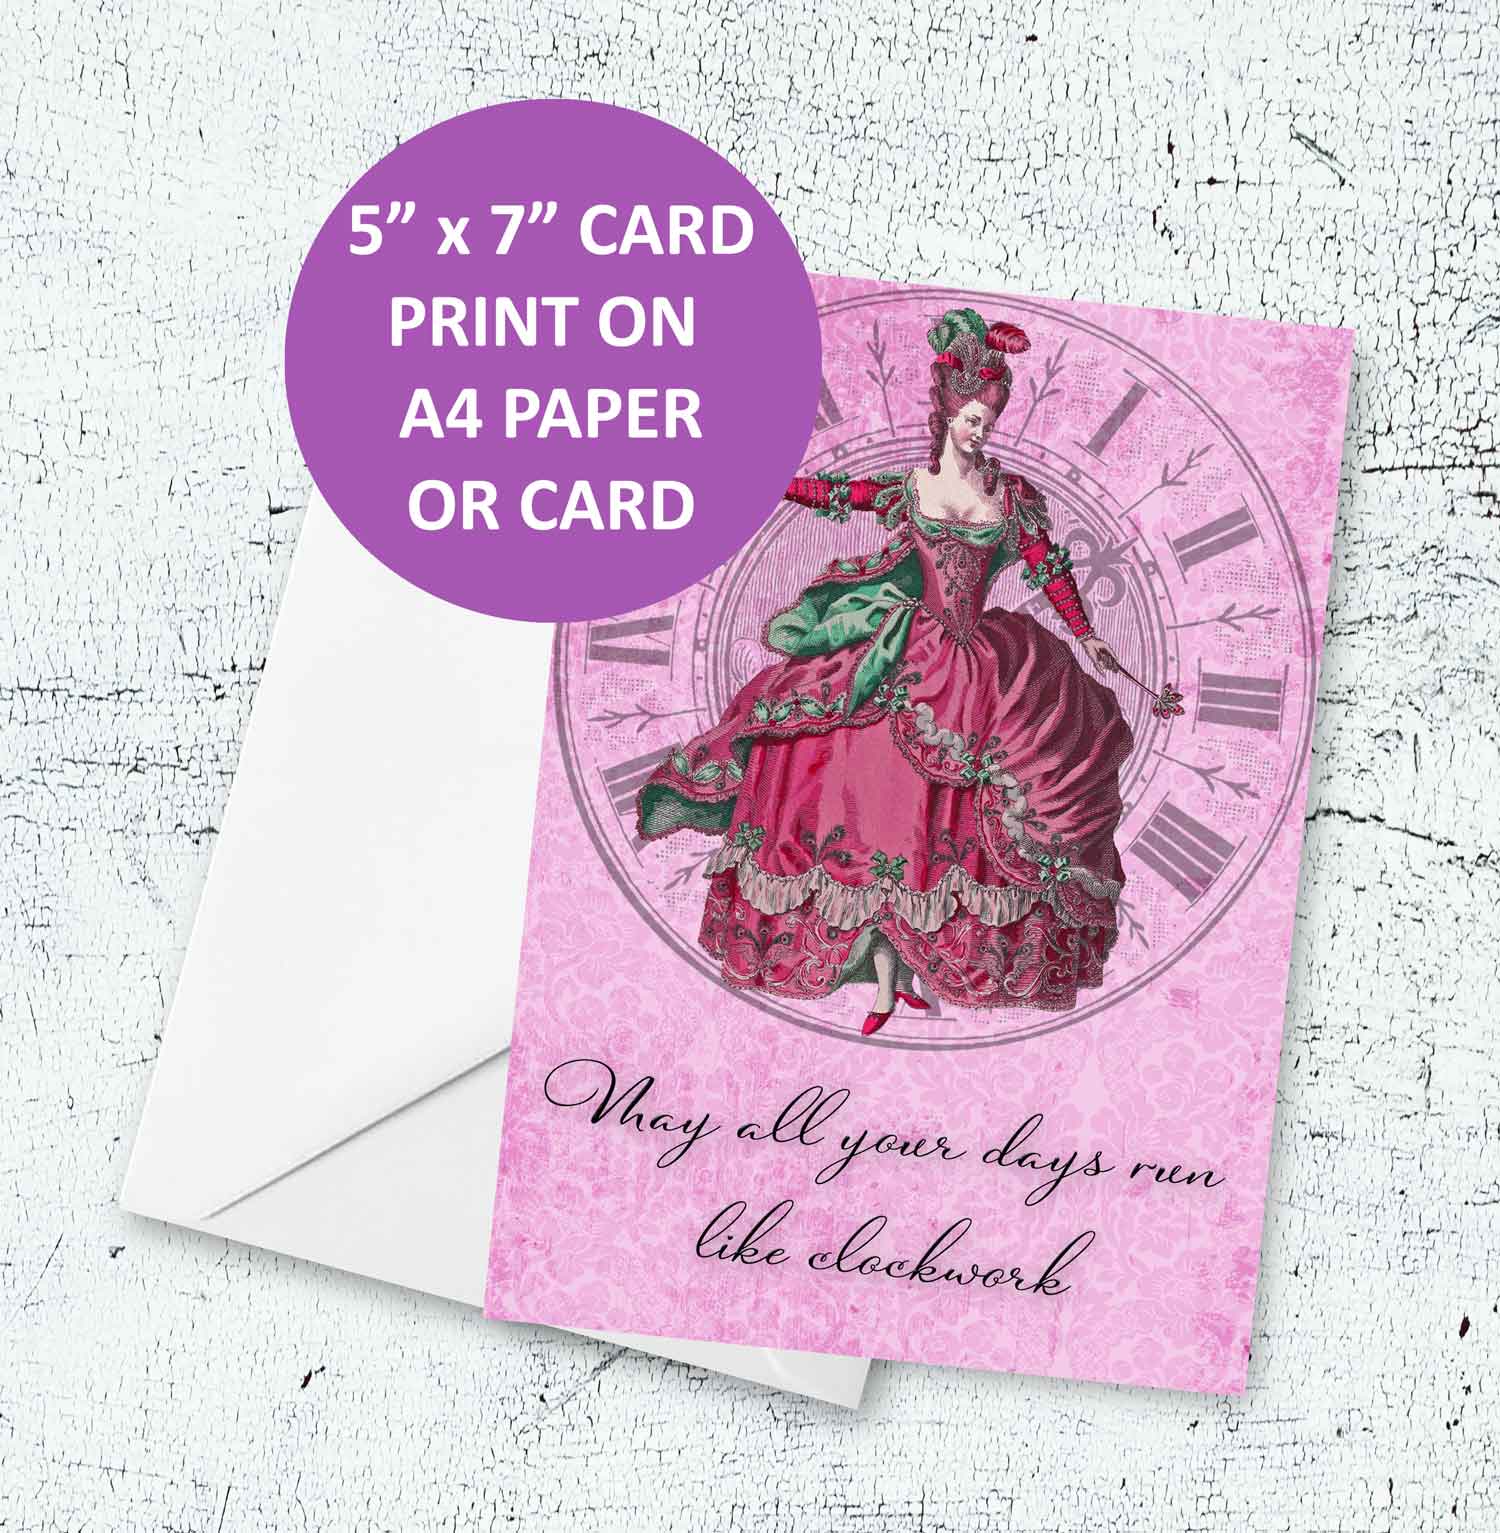 instructions for the card size to print out the Victorian Lady with teacups card